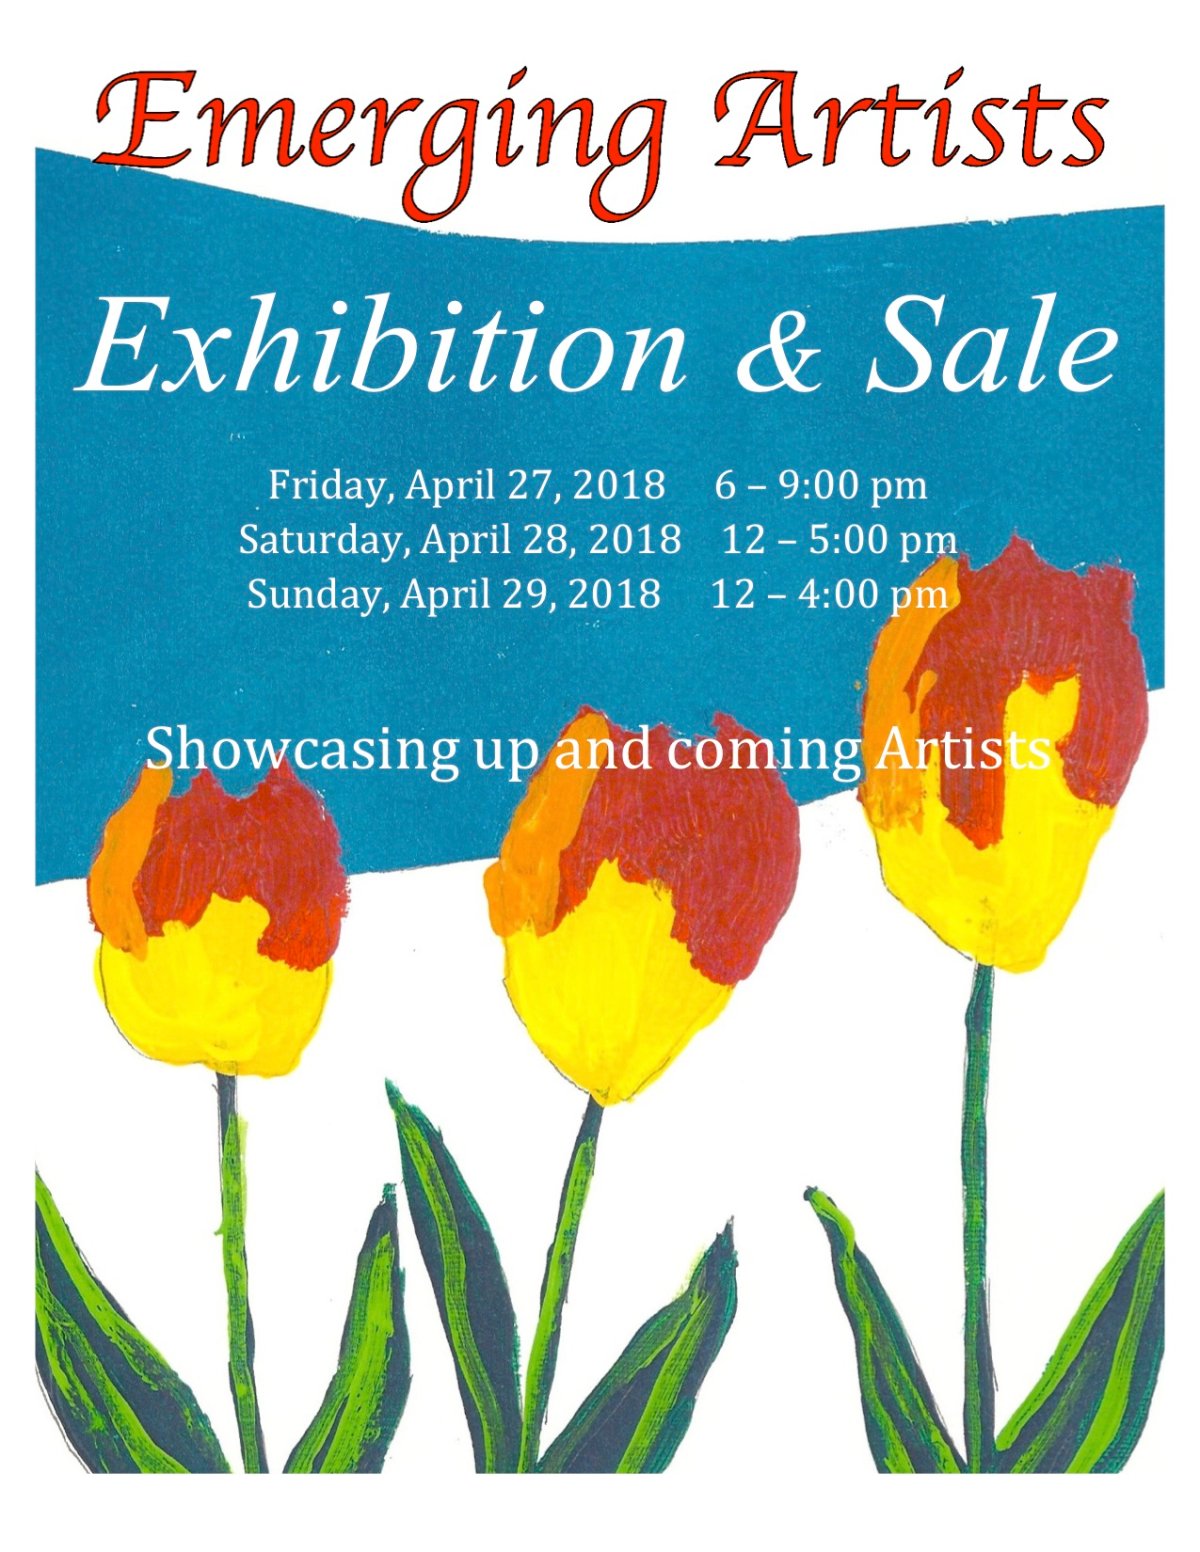 Emerging Artists Exhibition and Sale - image